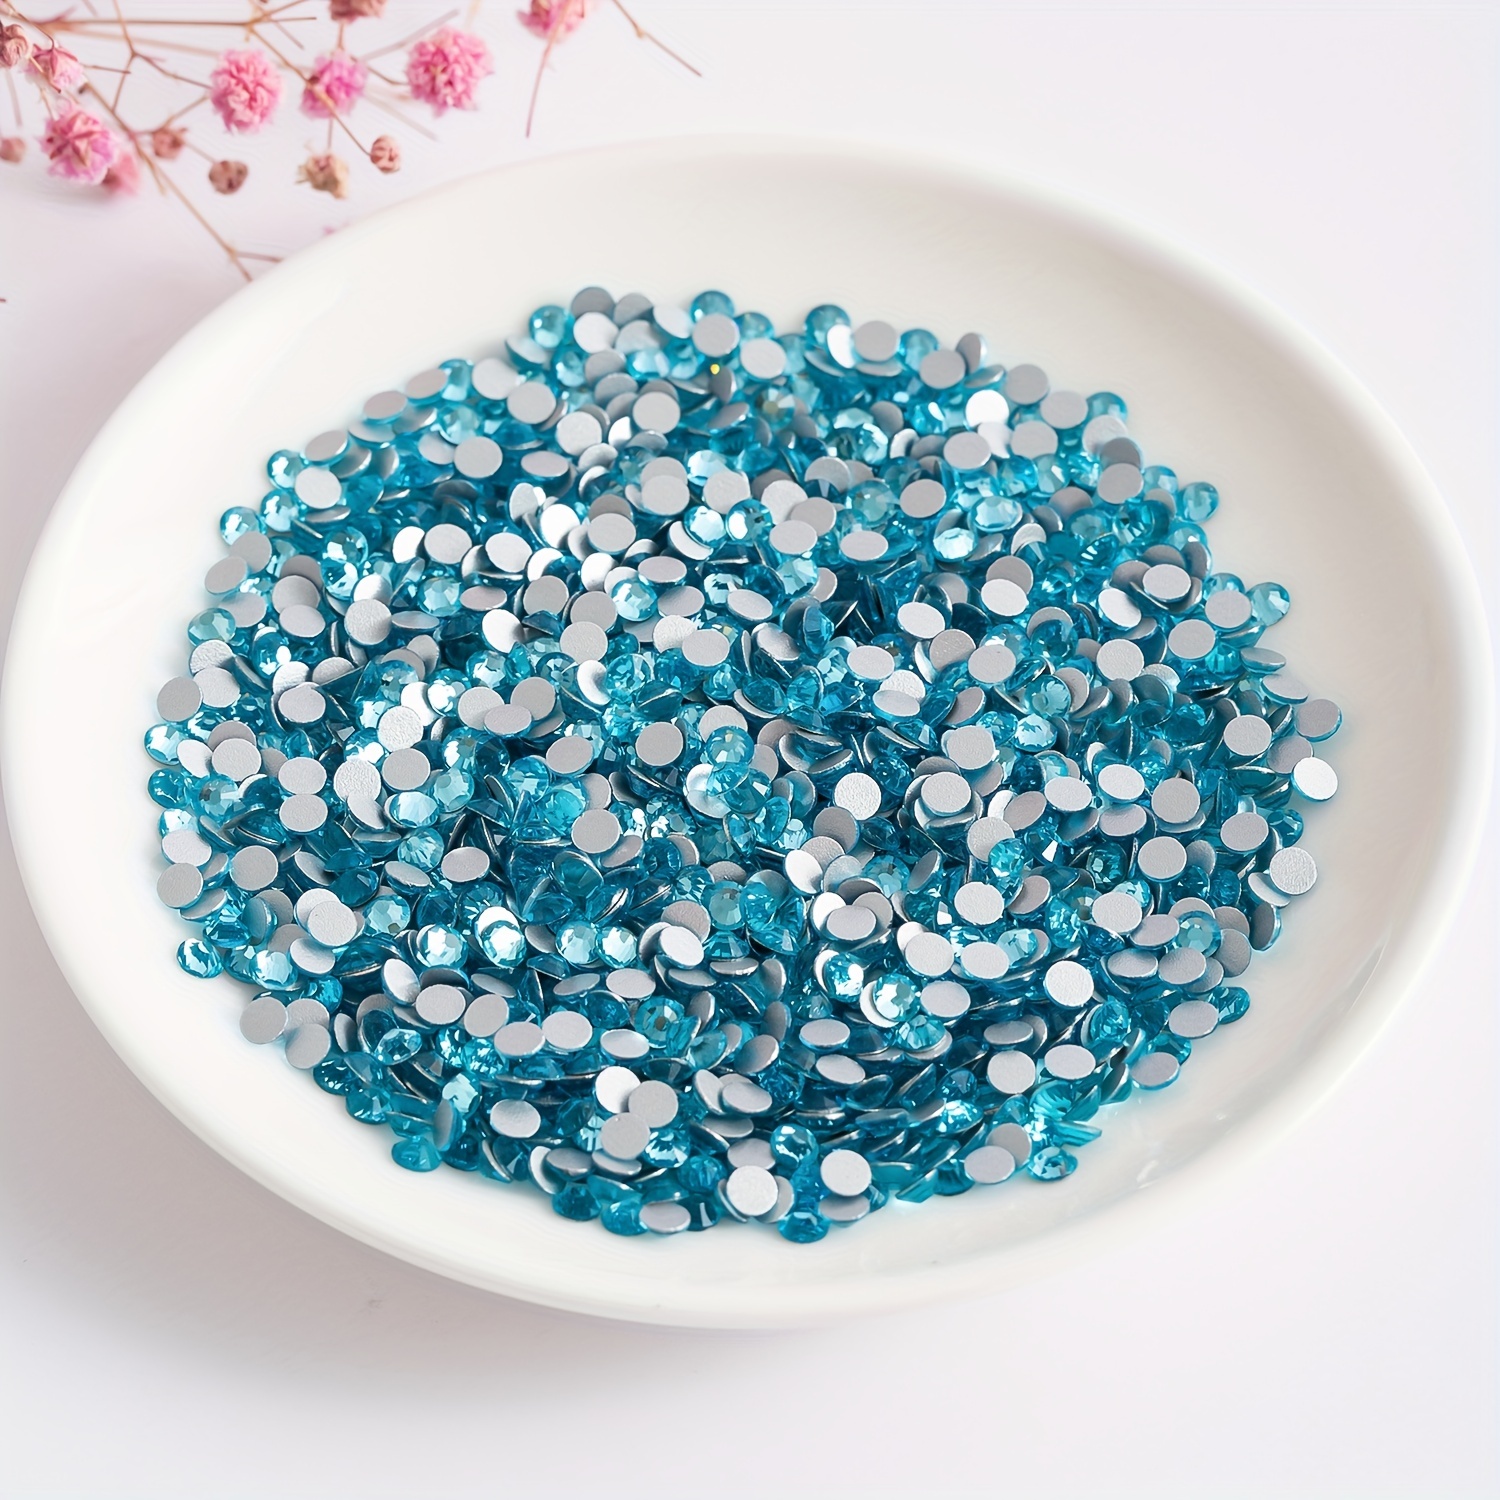 B7000 Rhinestones Glue with Blue Gems for Clothes,2000Pcs Flat Back  Rhinestones for Crafts Crystal with Dotting Tools Clear Glue for Fabric  Shoes Jewelry Making Nail Art Decoration 